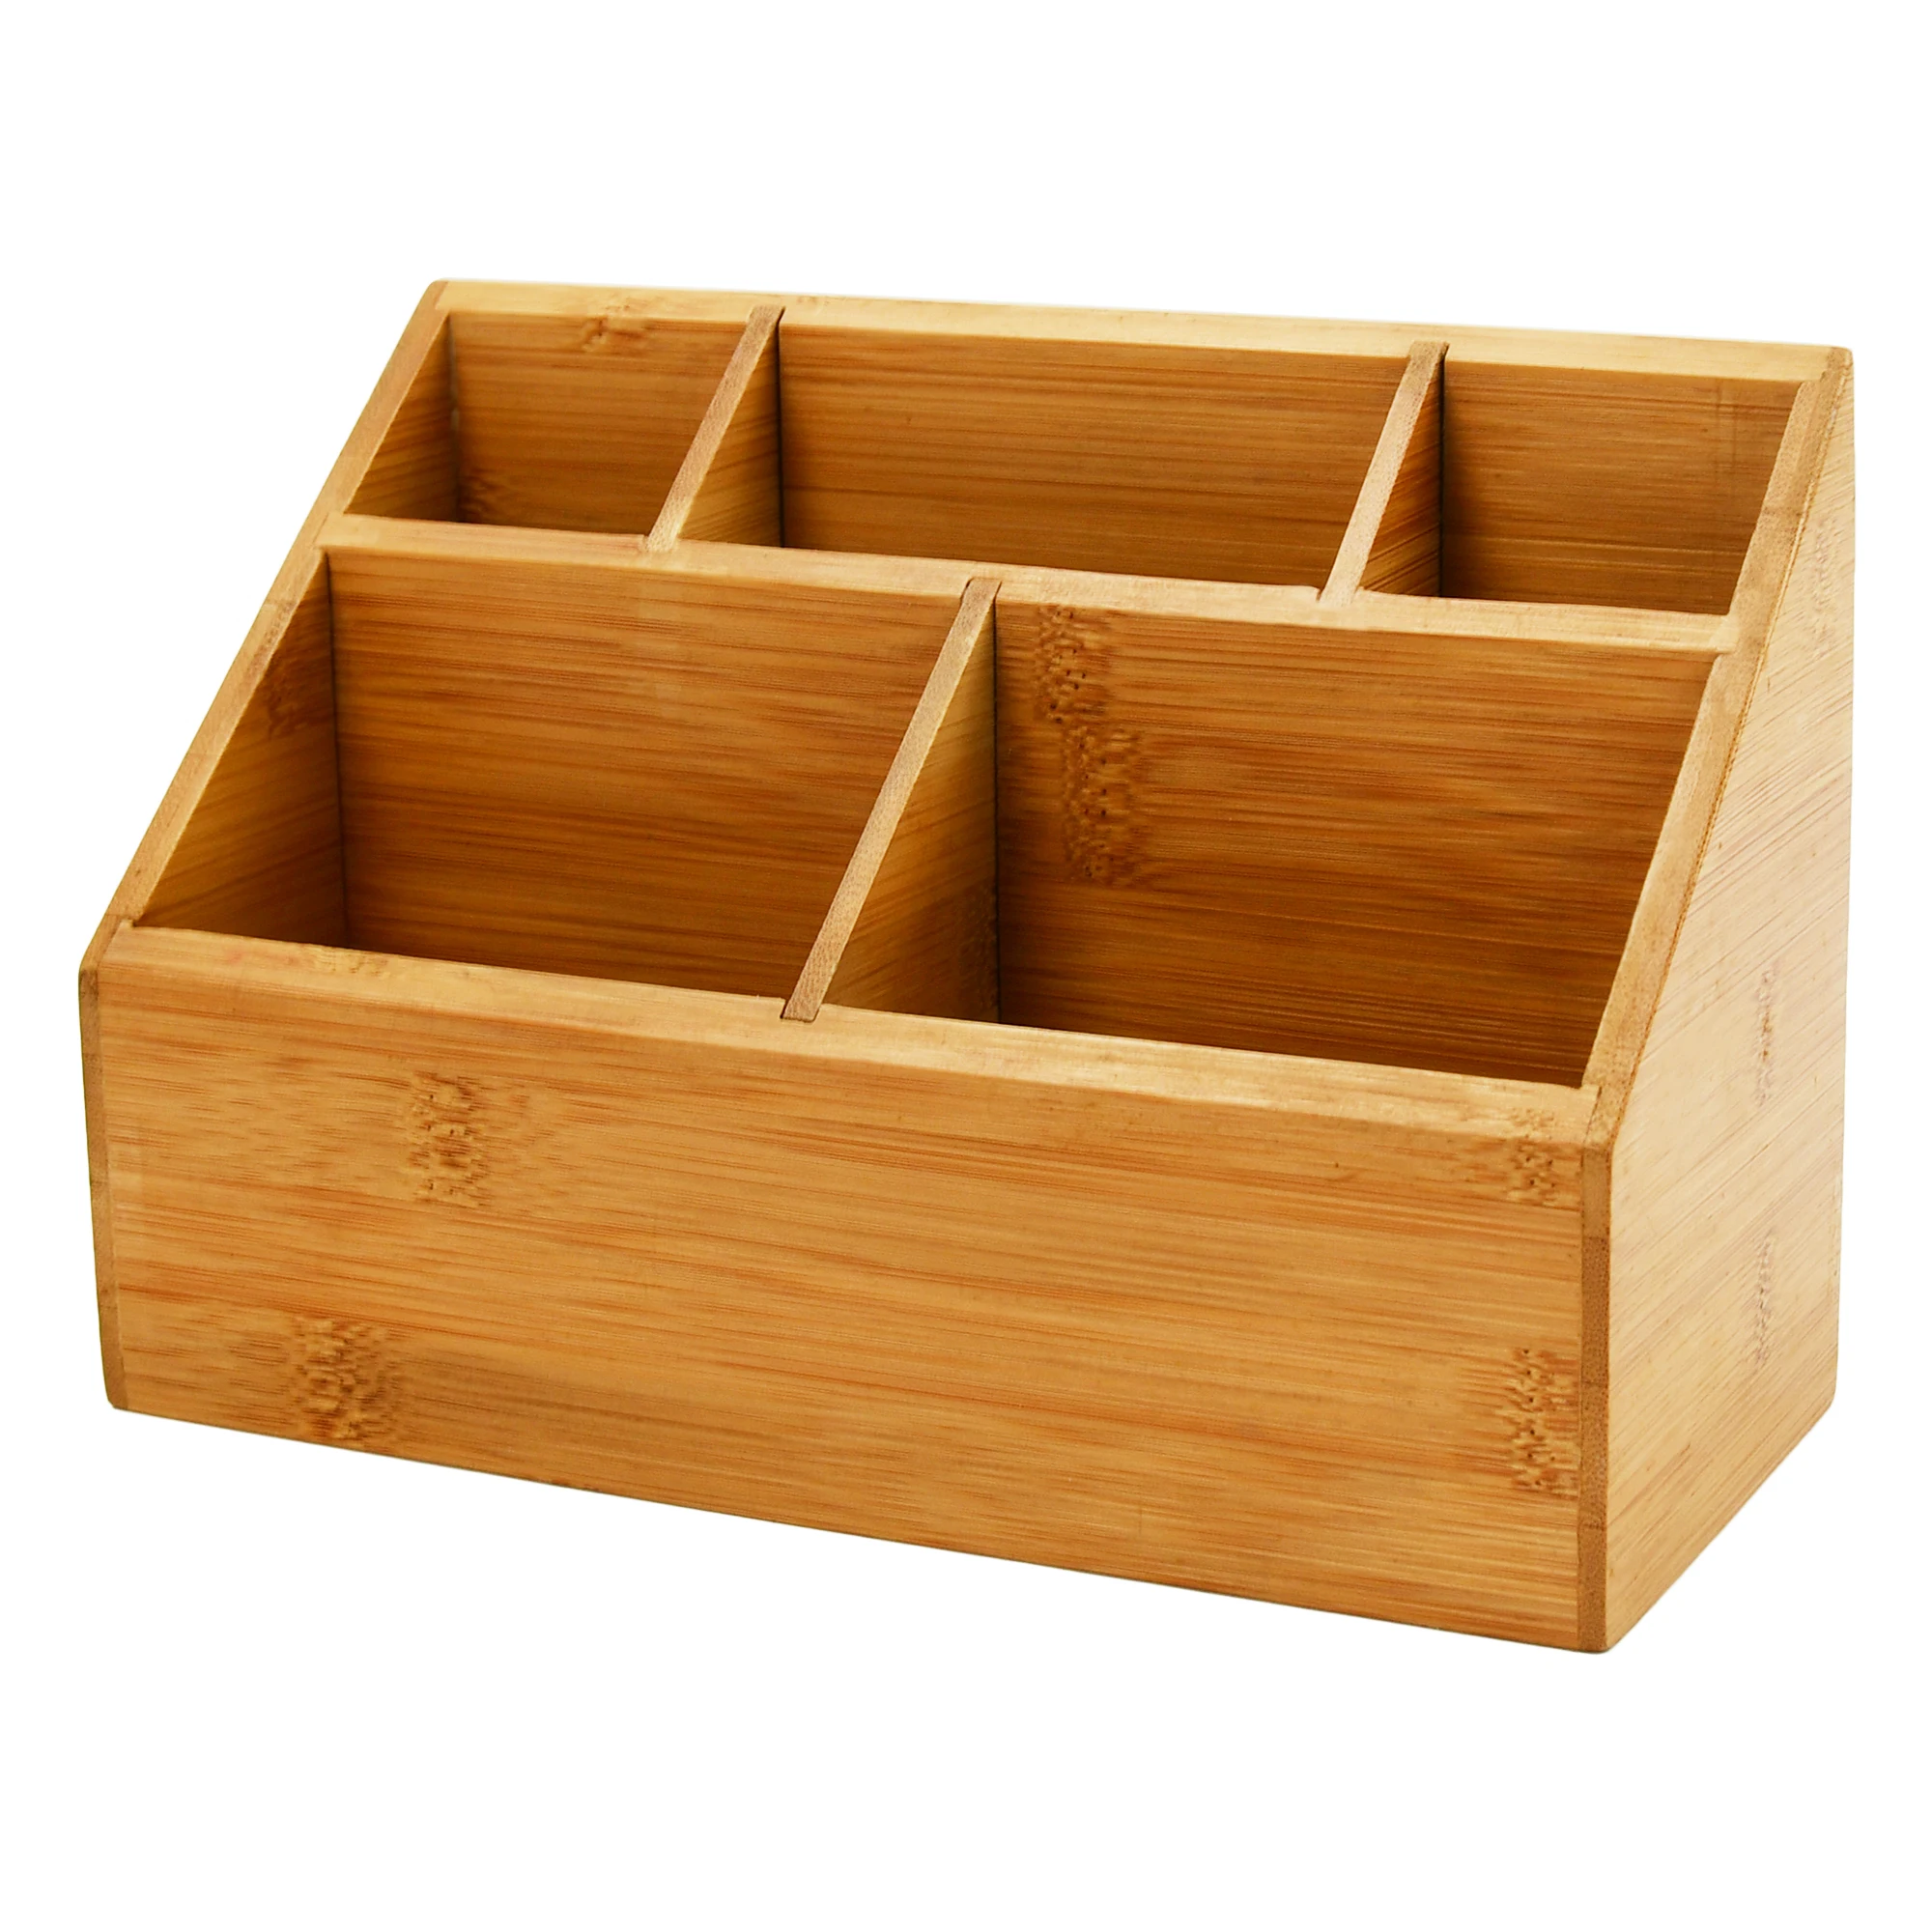 YOULIKE Wood Desktop Stationery and Office Supplies Organizer Bamboo Mail Holder Letters Bills Sorter Desk Caddy